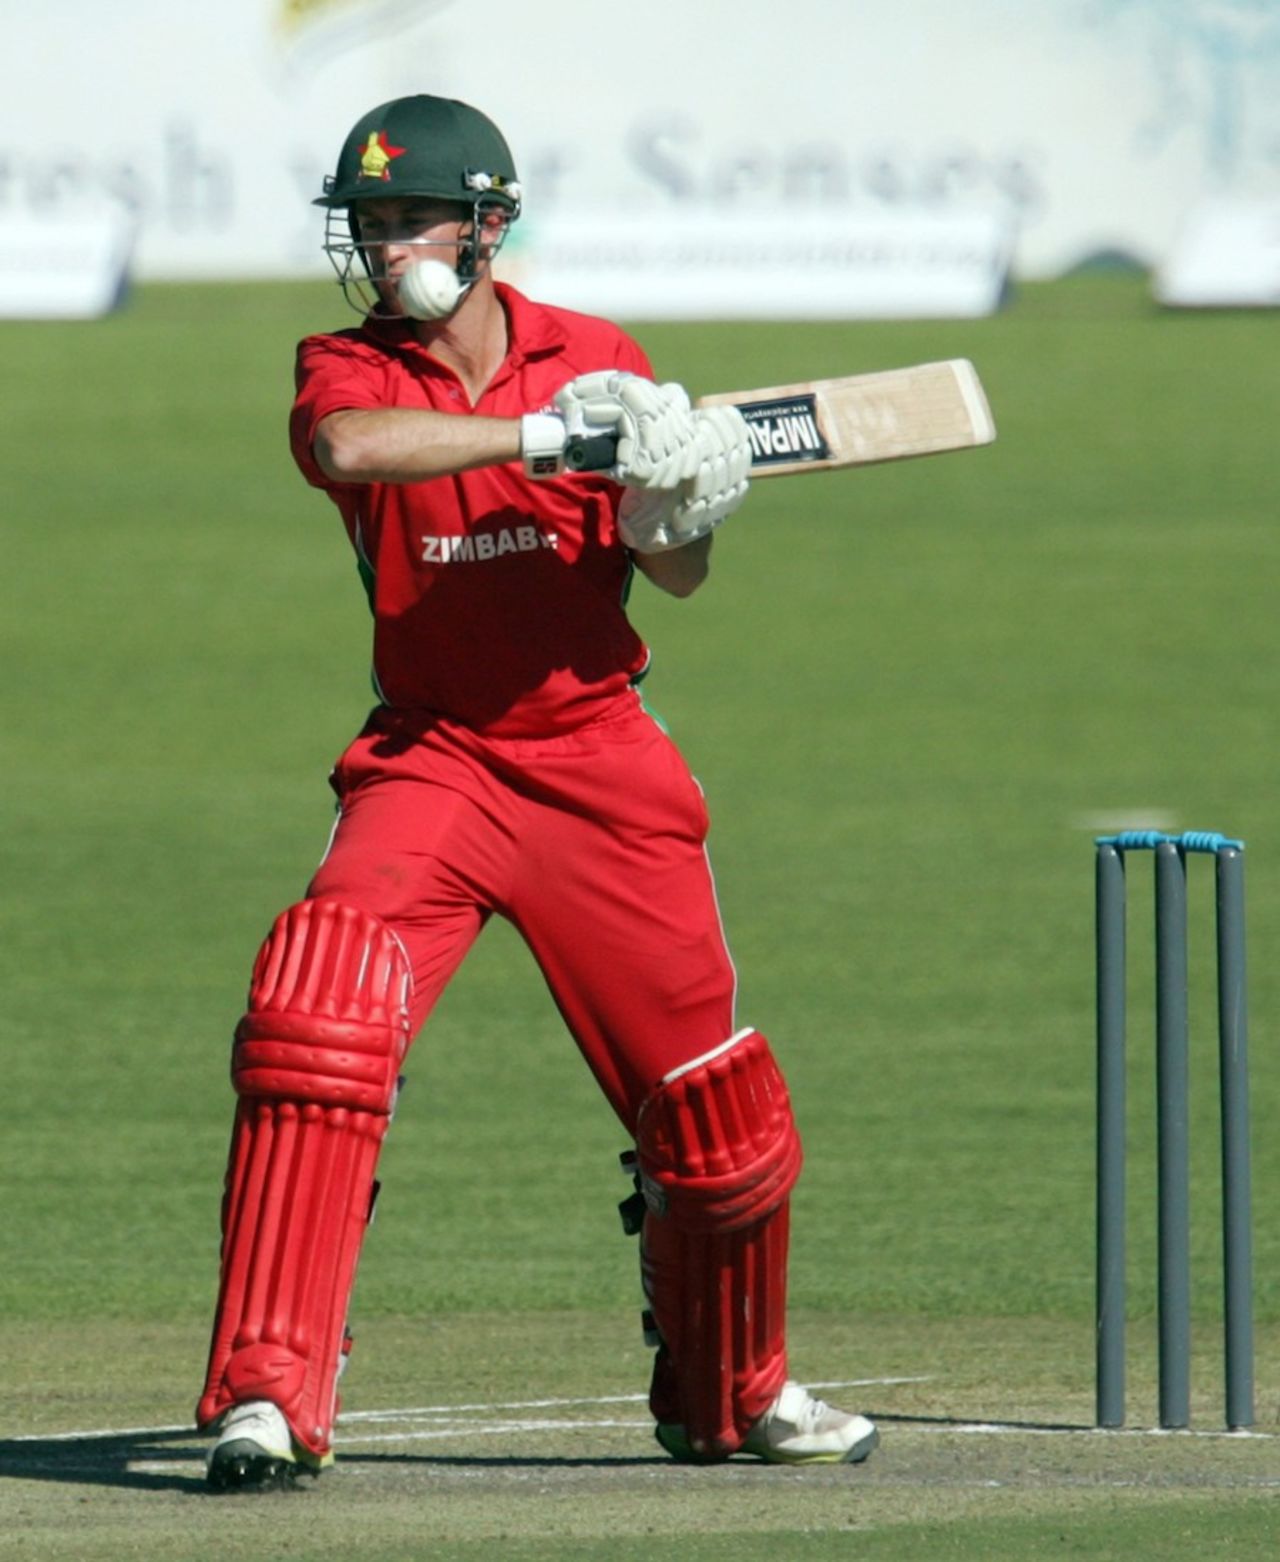 Sean Williams gets ready to face a short ball, Zimbabwe v South Africa, 2nd ODI, Bulawayo, August 19, 2014